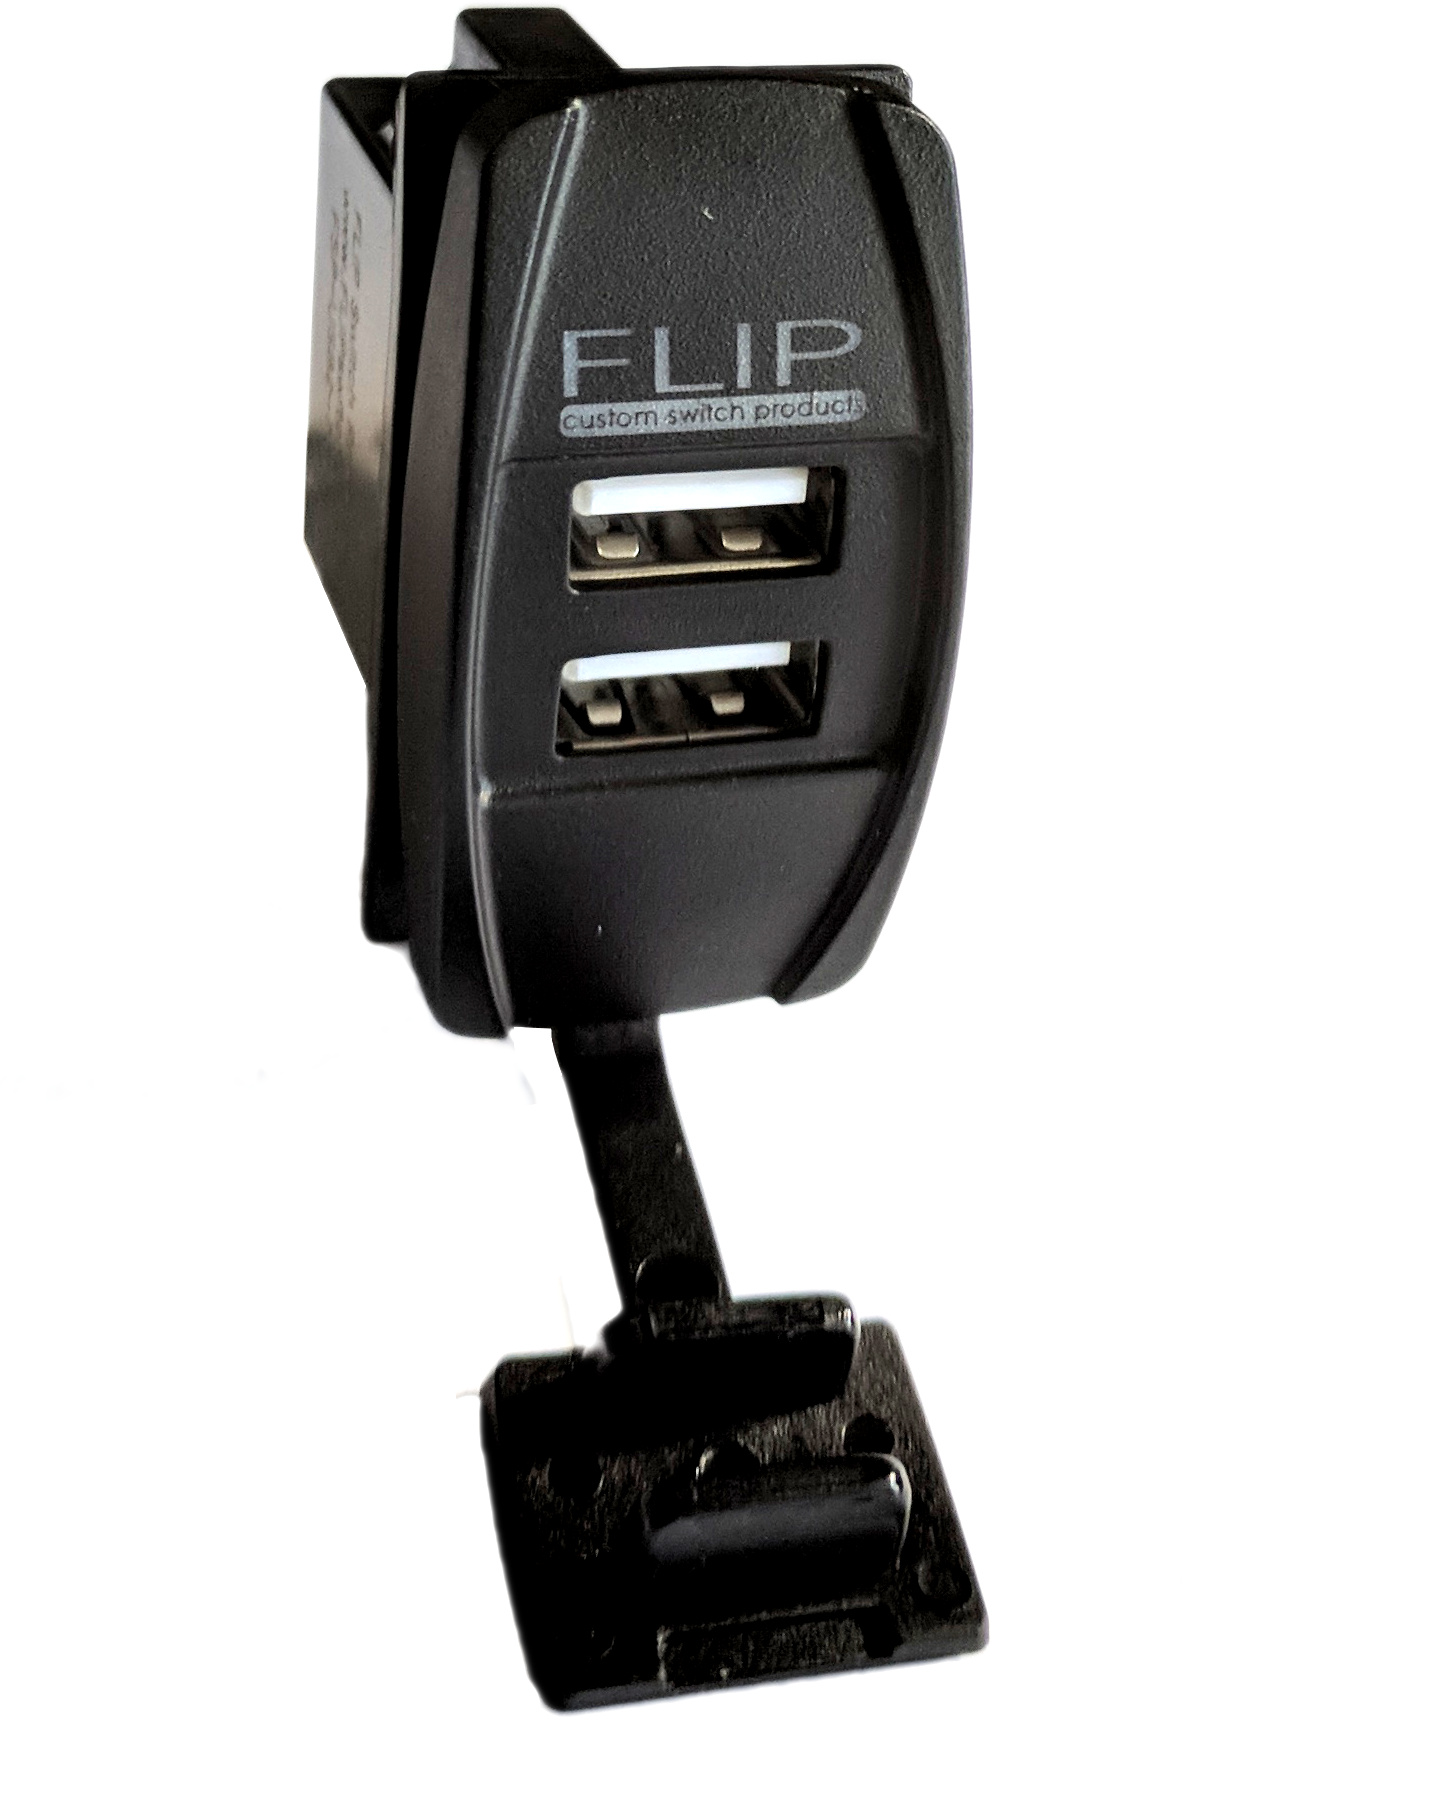 Dual USB Dash Charging Port To Match Illuminated Rocker Switches - Click Image to Close